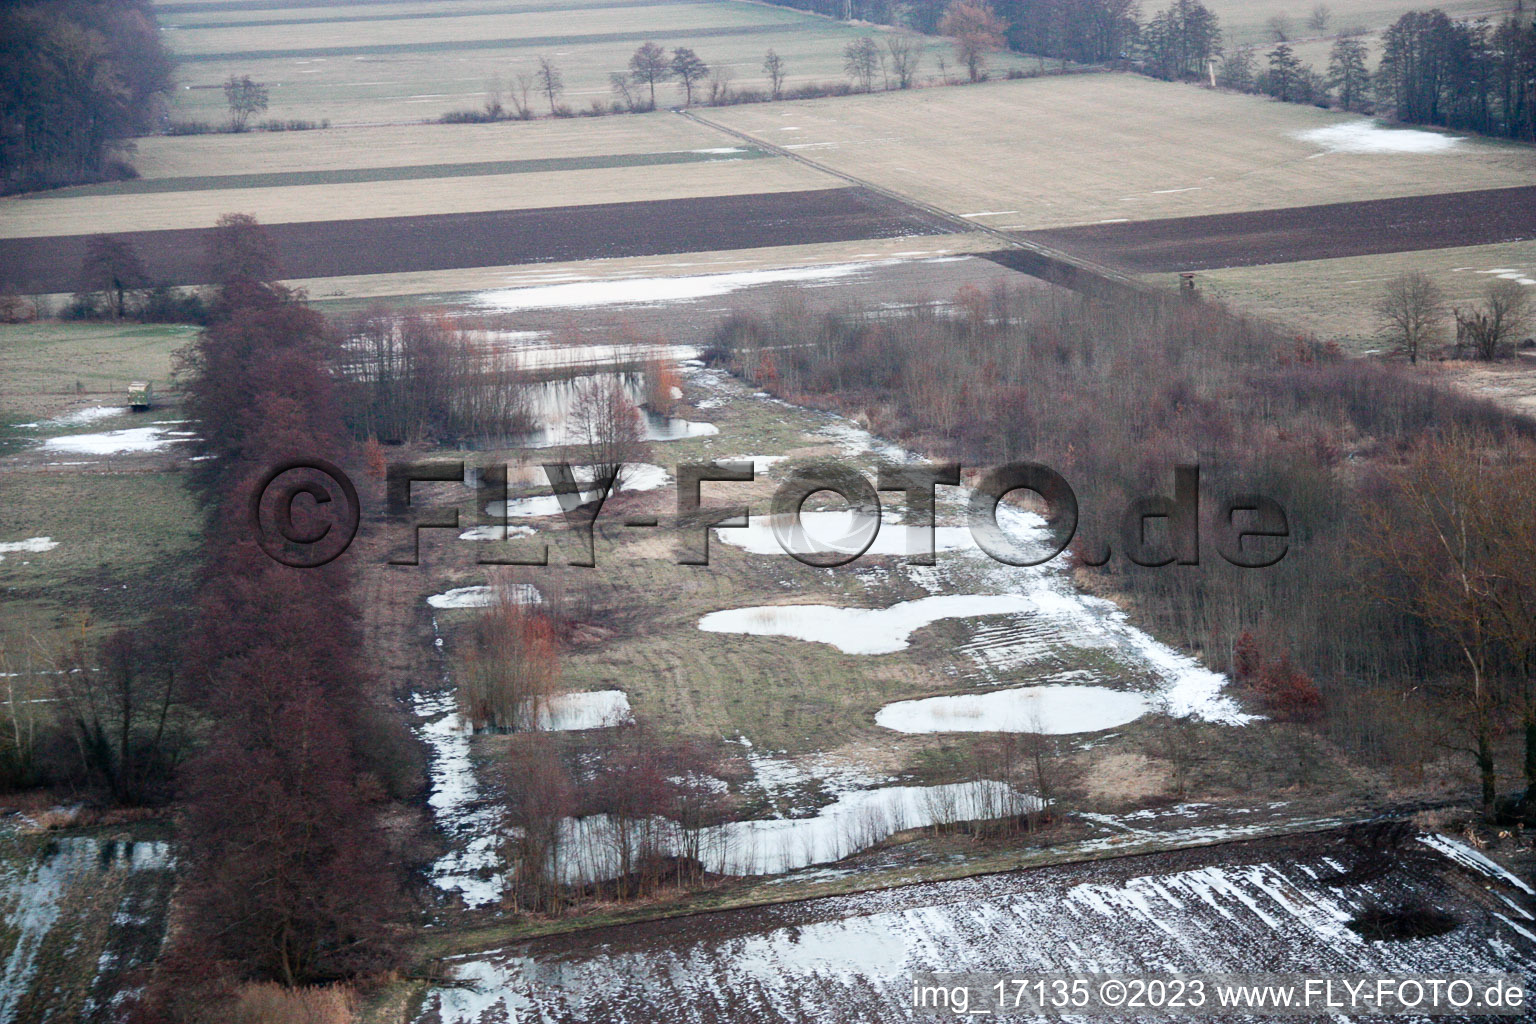 Otterbachtal meadows flooded by dew water in Kandel in the state Rhineland-Palatinate, Germany